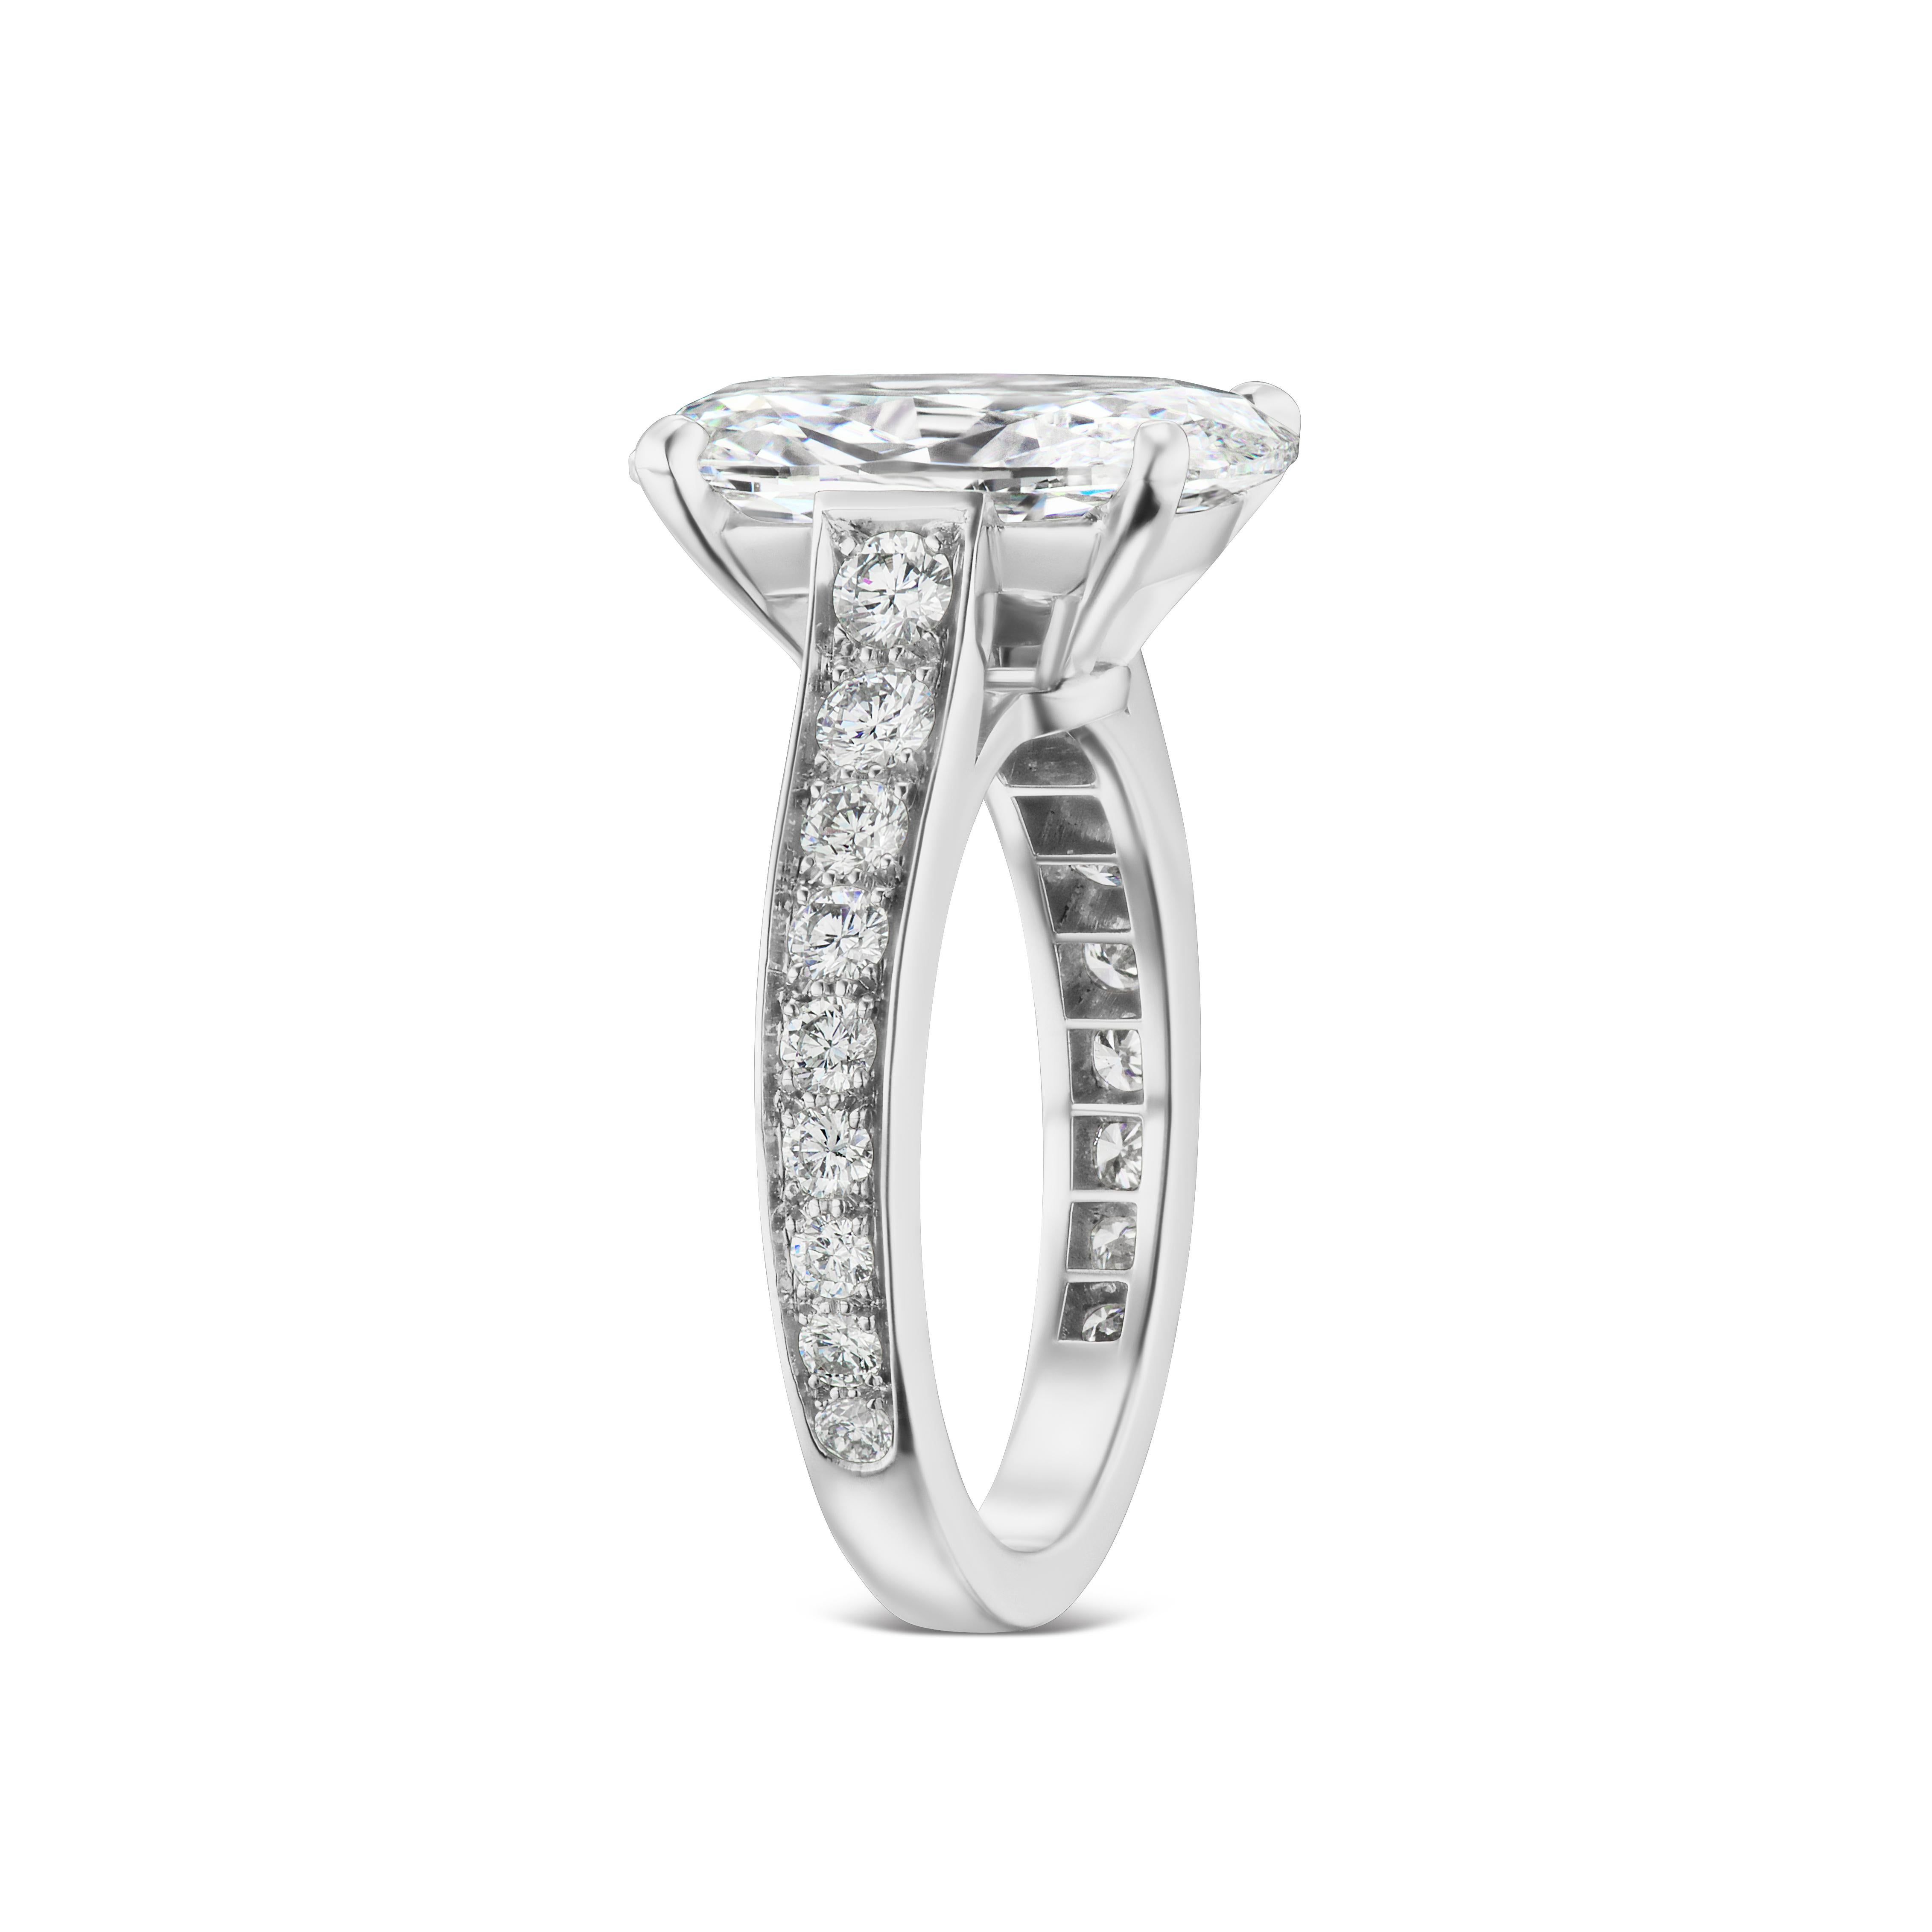 Oordeel Laan Bully Cartier Cushion Cut on Sale, UP TO 54% OFF | www.taqueriadelalamillo.com